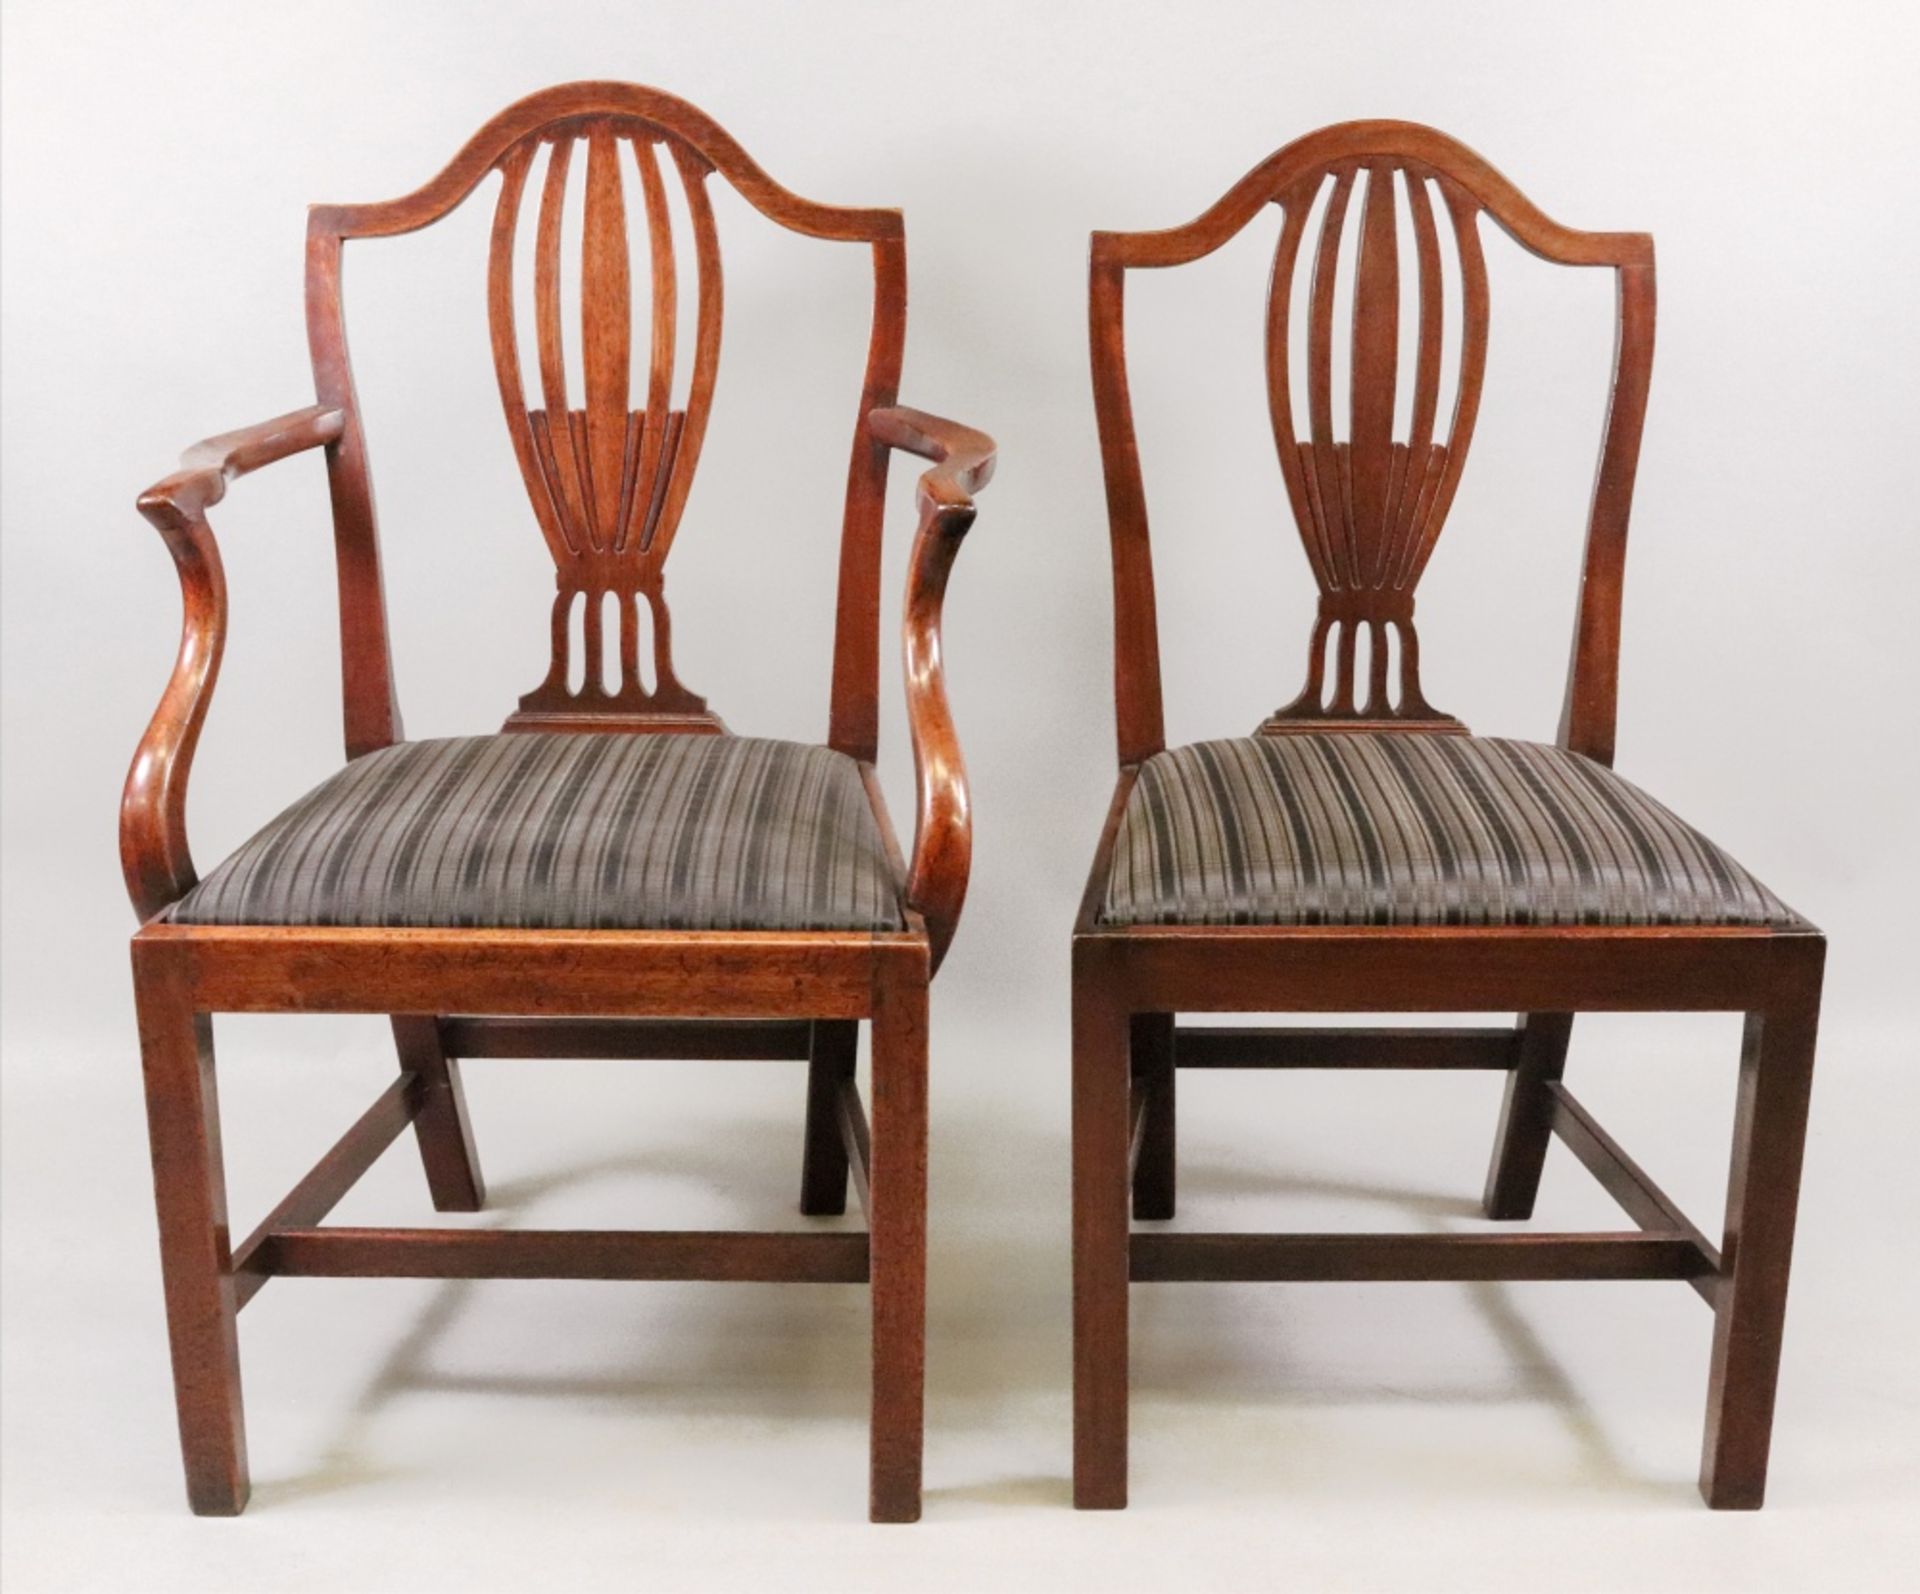 A set of six George III style Hepplewhite design mahogany dining chairs, 19th century, - Image 2 of 3